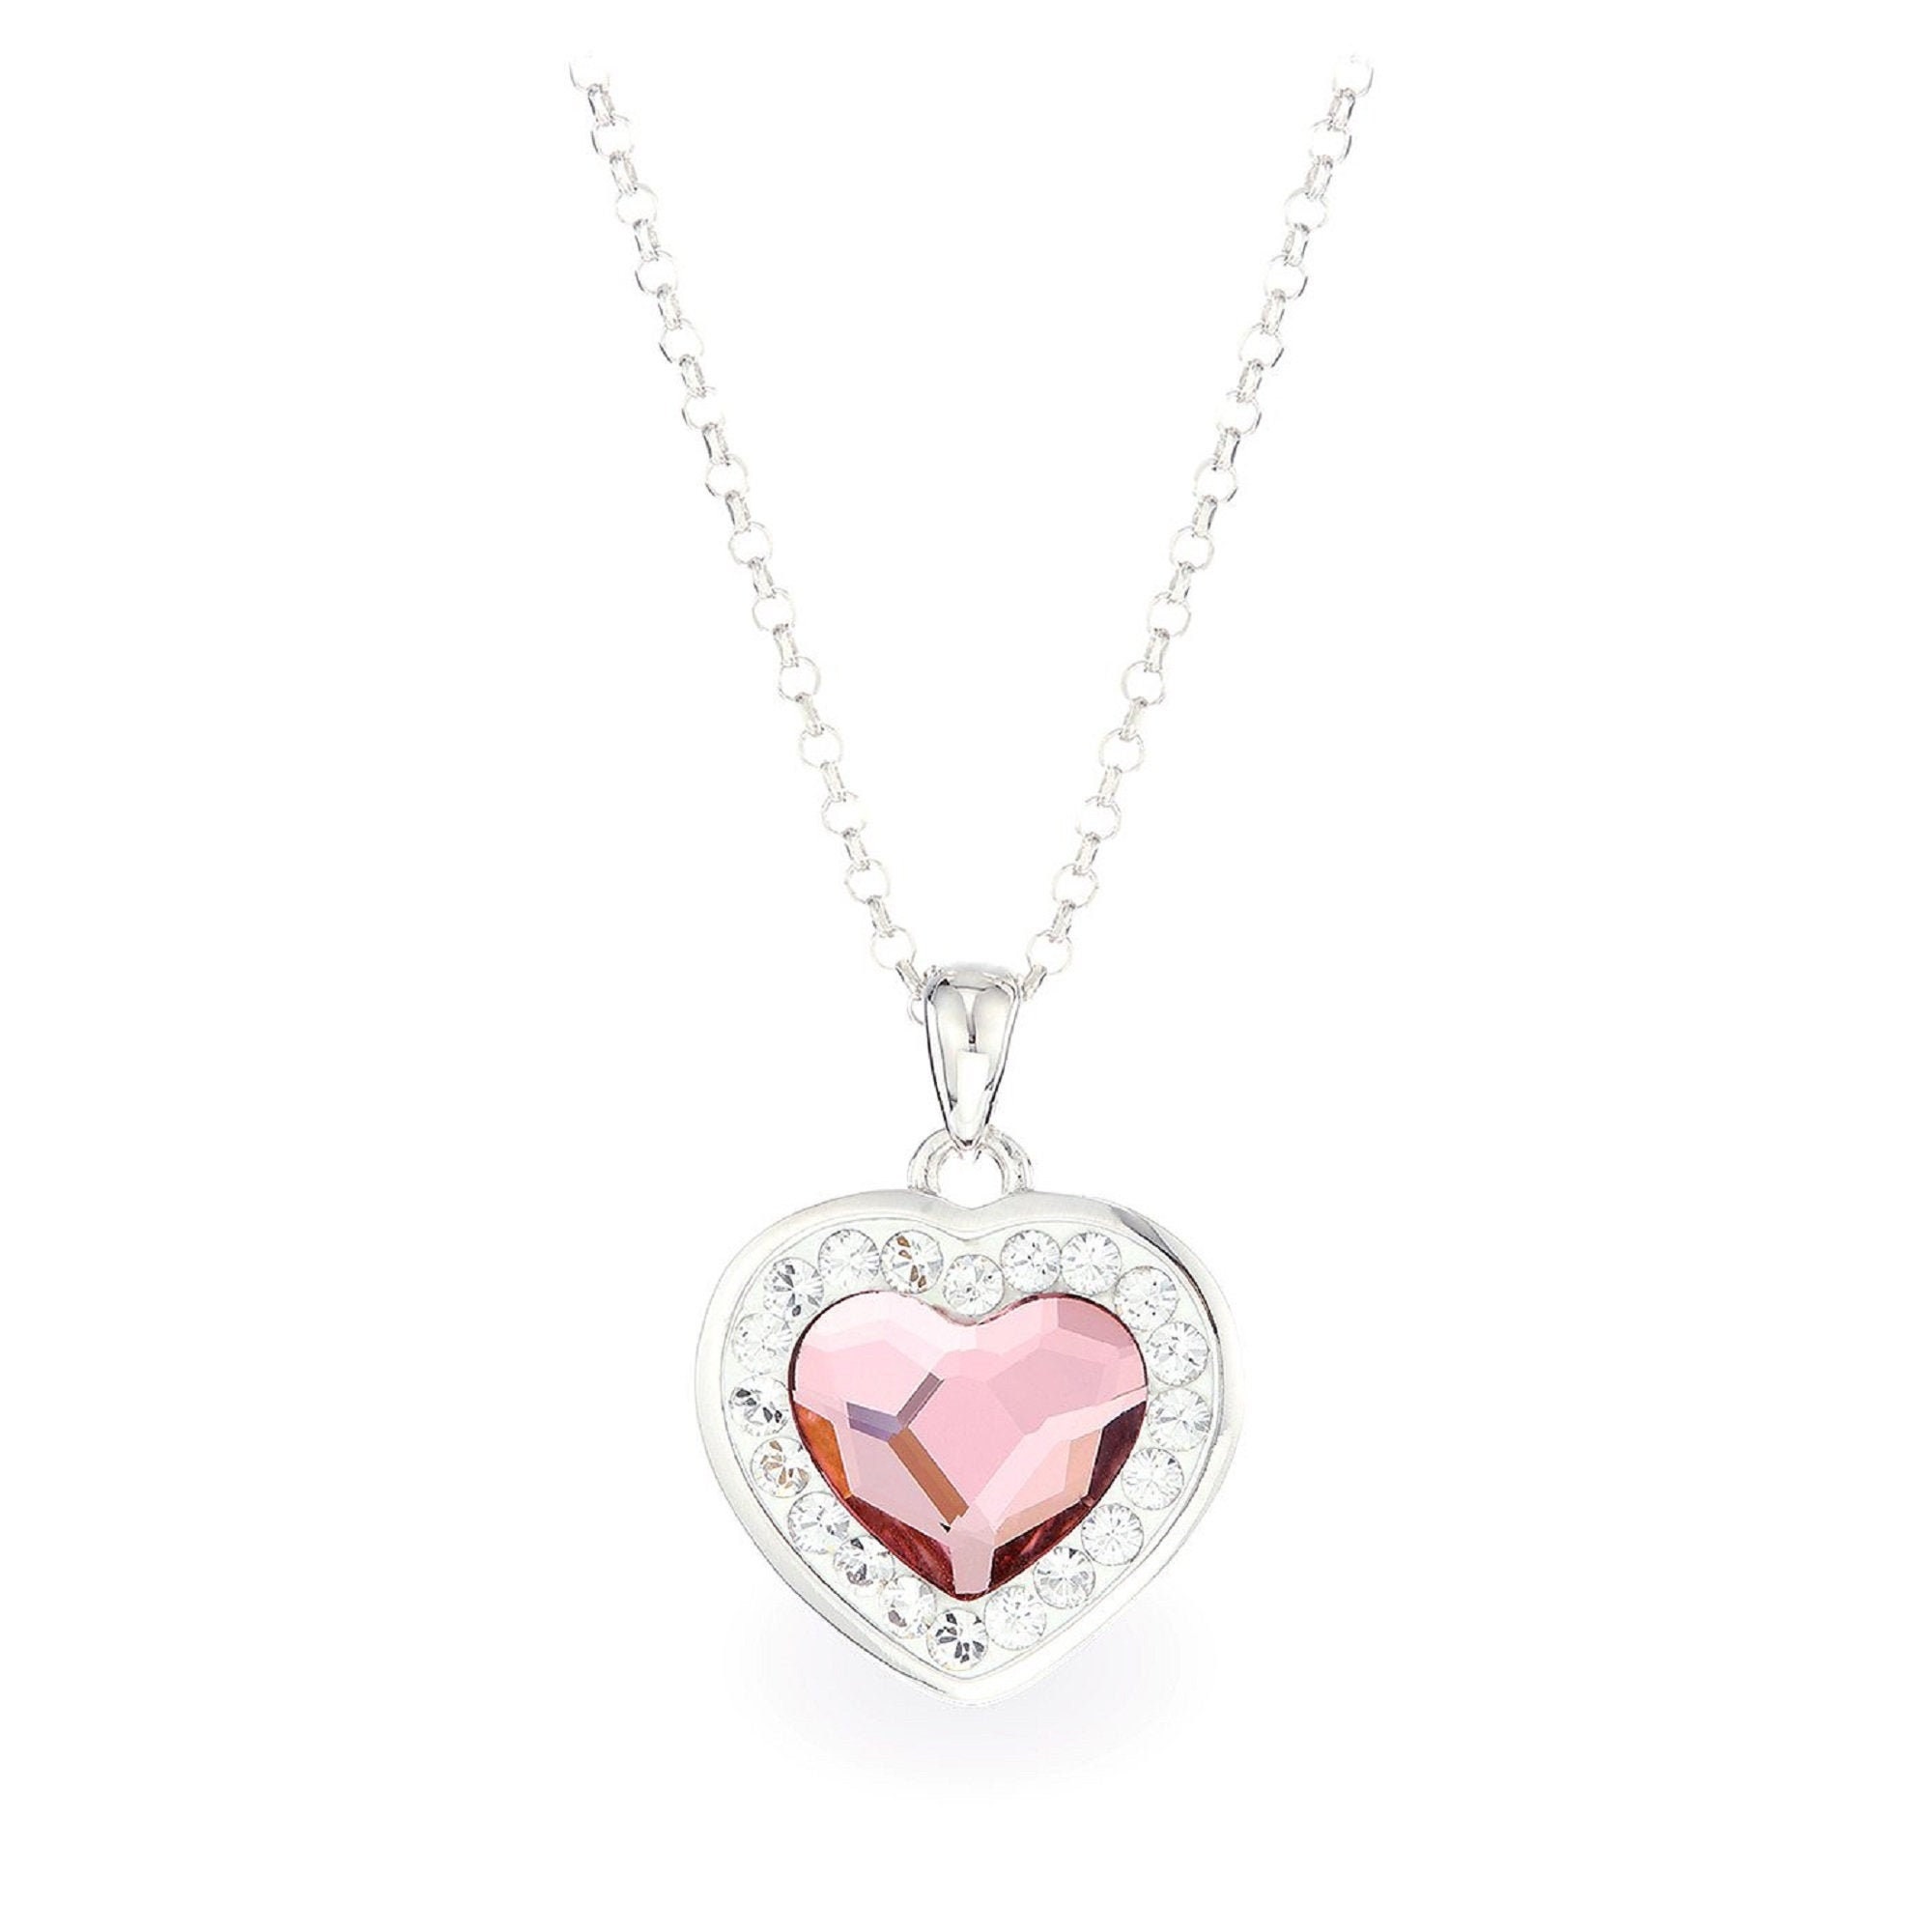 AVORA 10K Yellow Gold Pink Swarovski Crystal Elements Heart Pendant Necklace  with 18